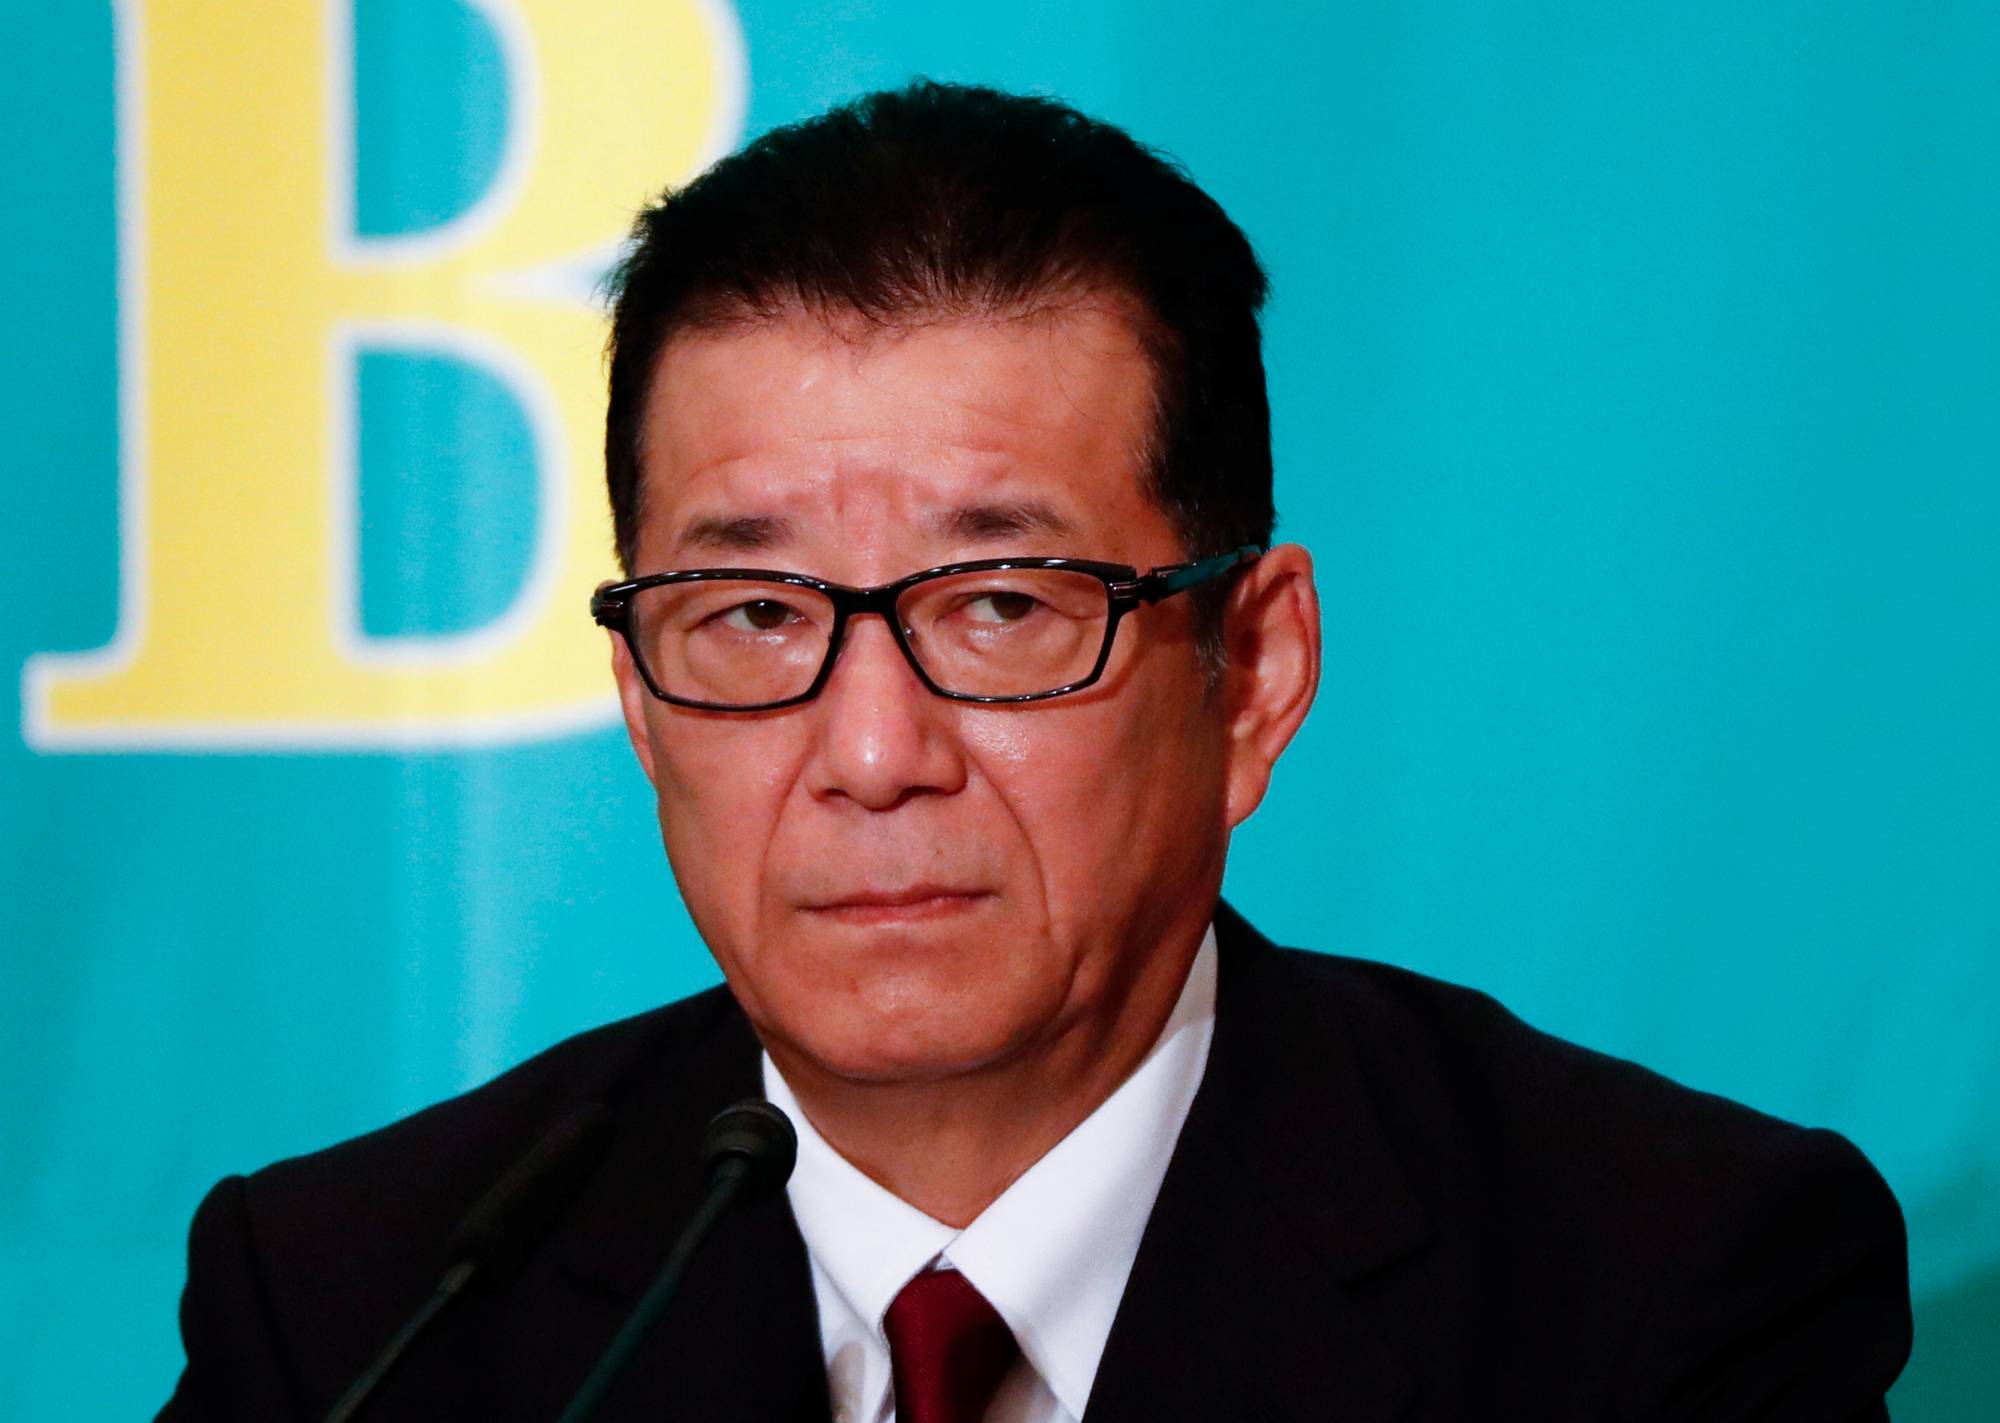 Nippon Ishin no Kai leader Ichiro Matsui has said the party would stand up to the ruling Liberal Democratic Party over lawmakers' allowances. | REUTERS